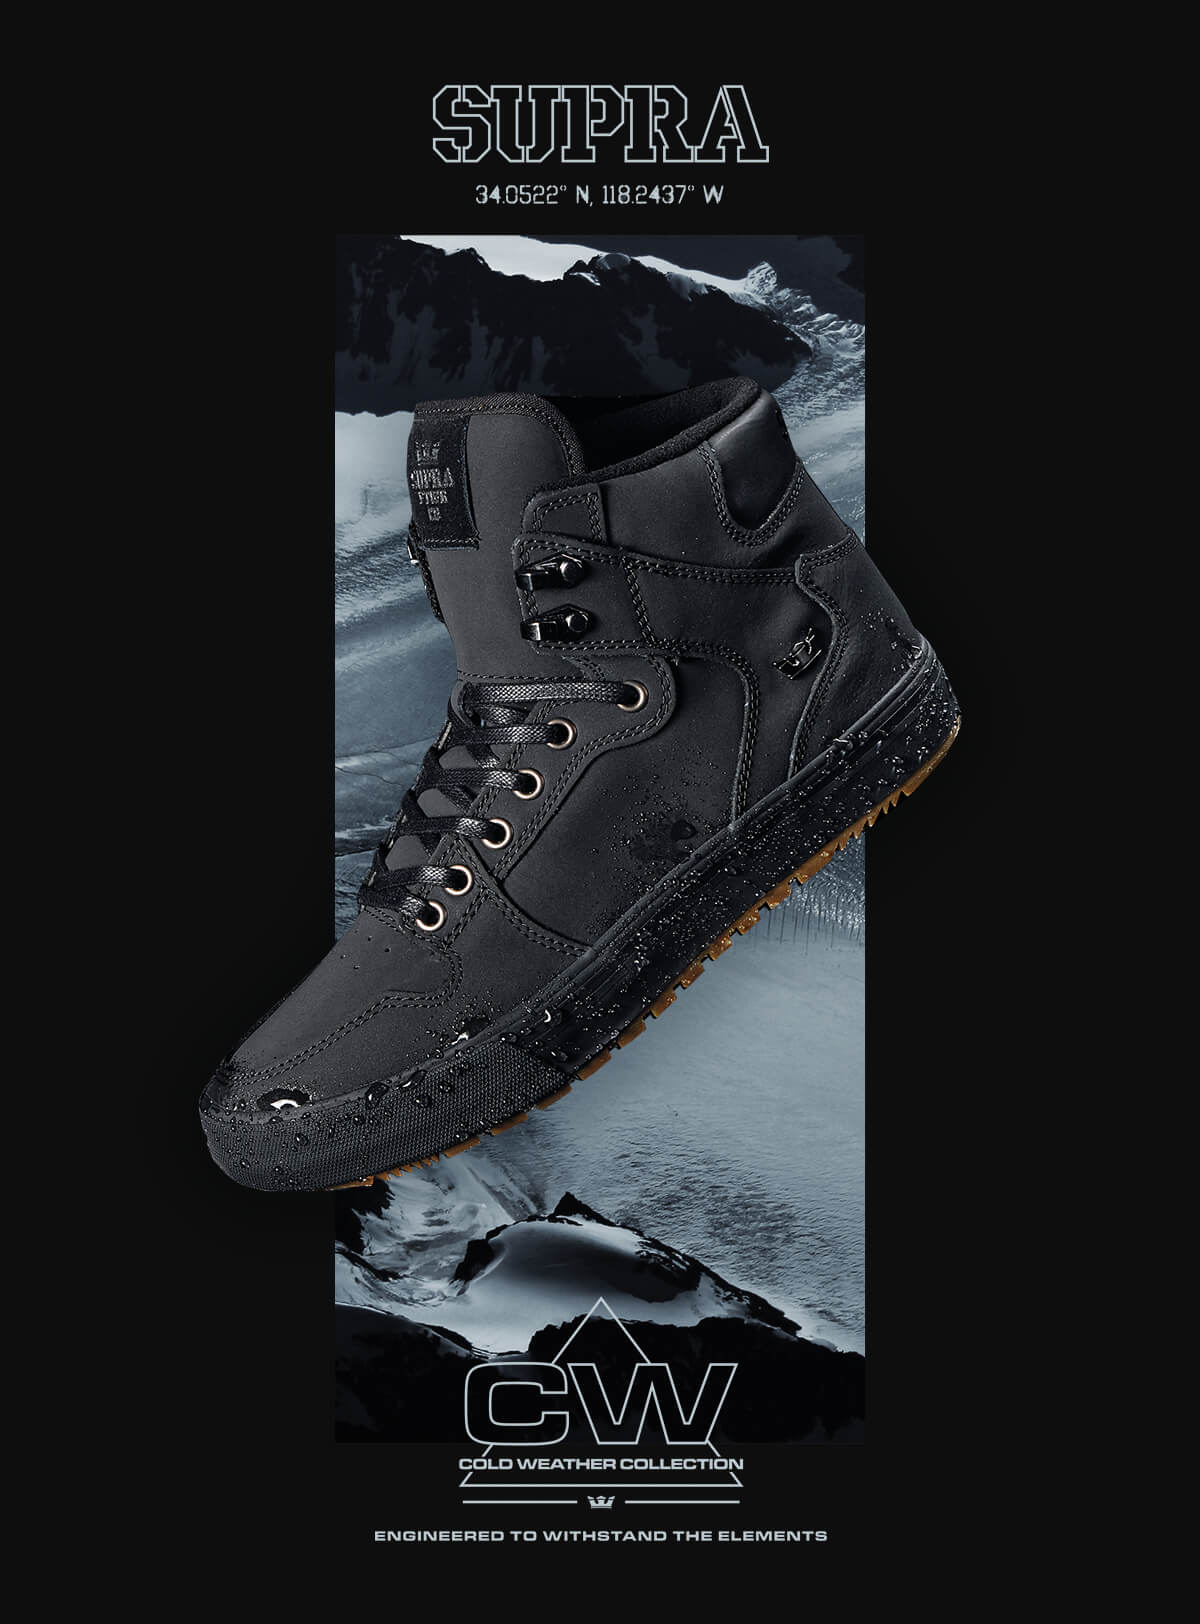 COLD WEATHER FOOTWEAR FROM SUPRA & MORE - SHOP NOW